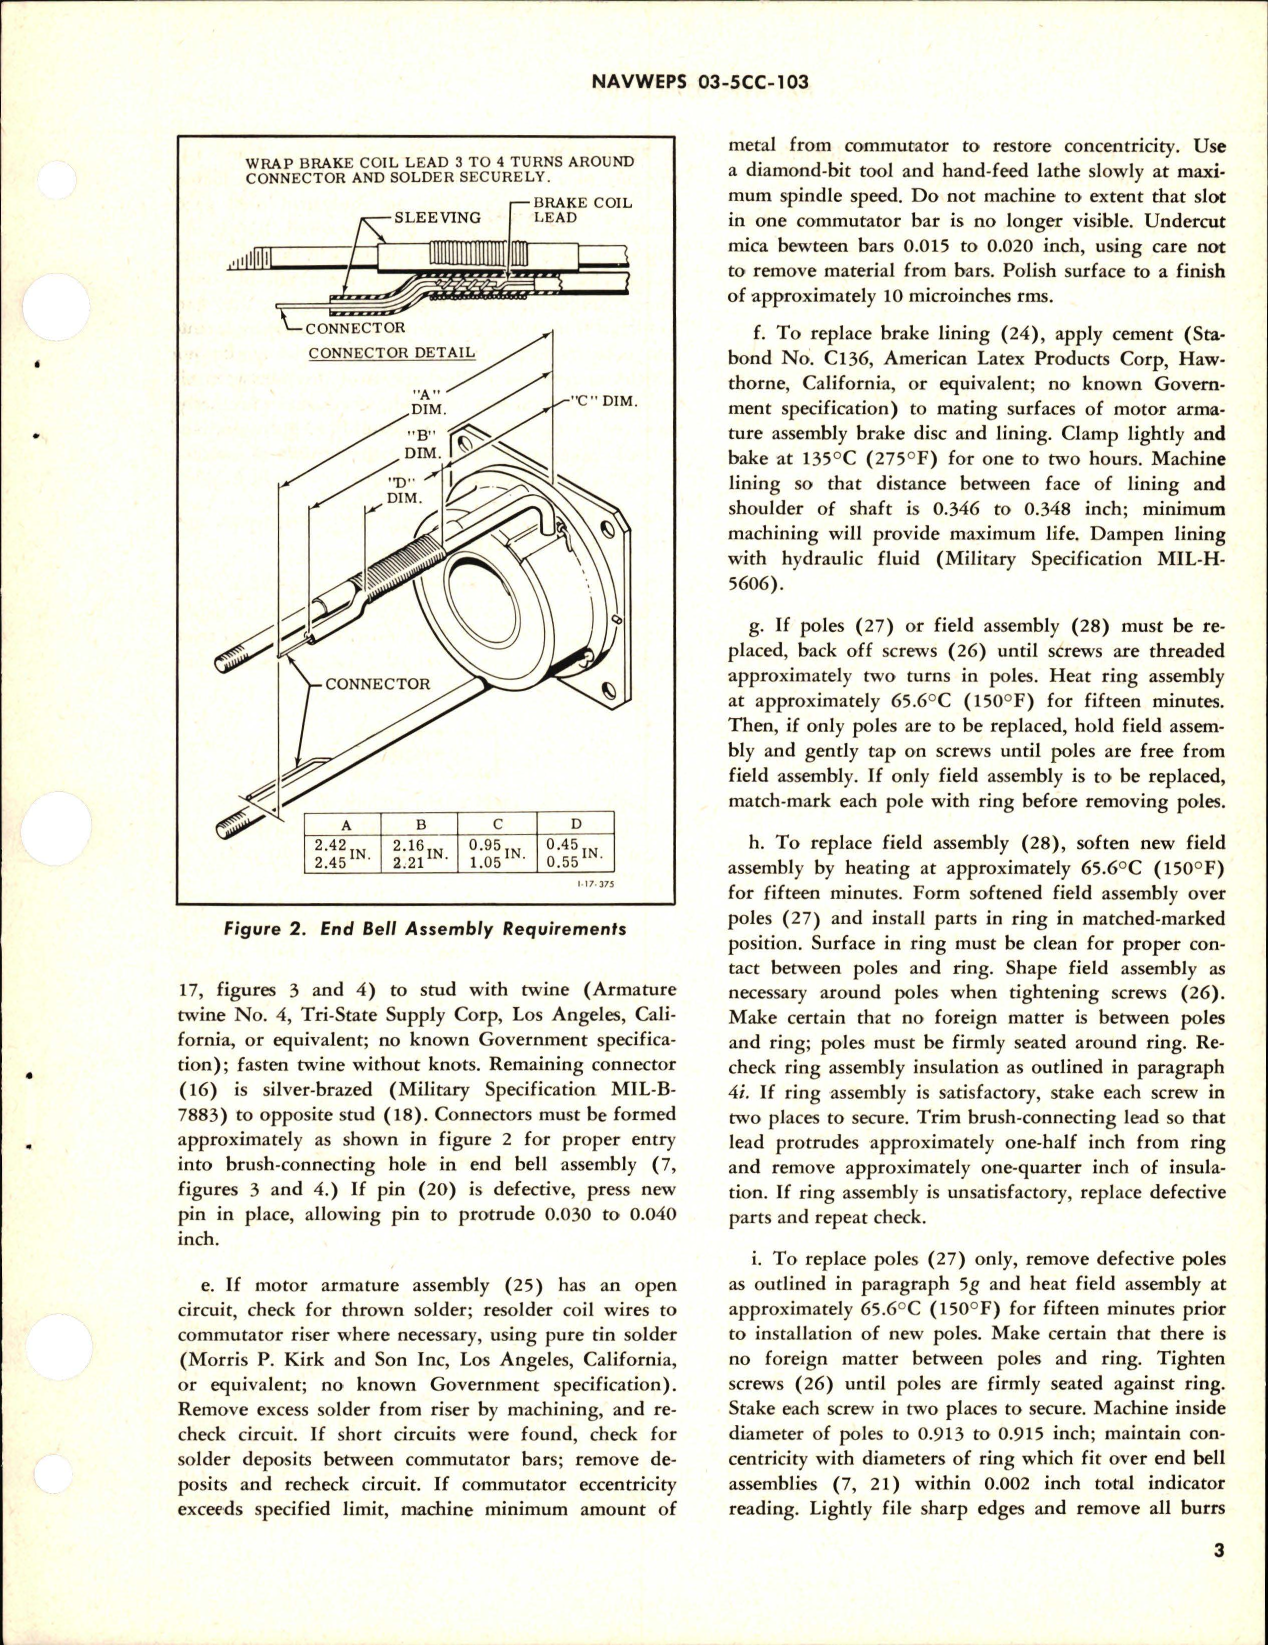 Sample page 5 from AirCorps Library document: Overhaul Instructions with Parts Breakdown for Direct-Current Motors - Parts 36702 and 36702-2